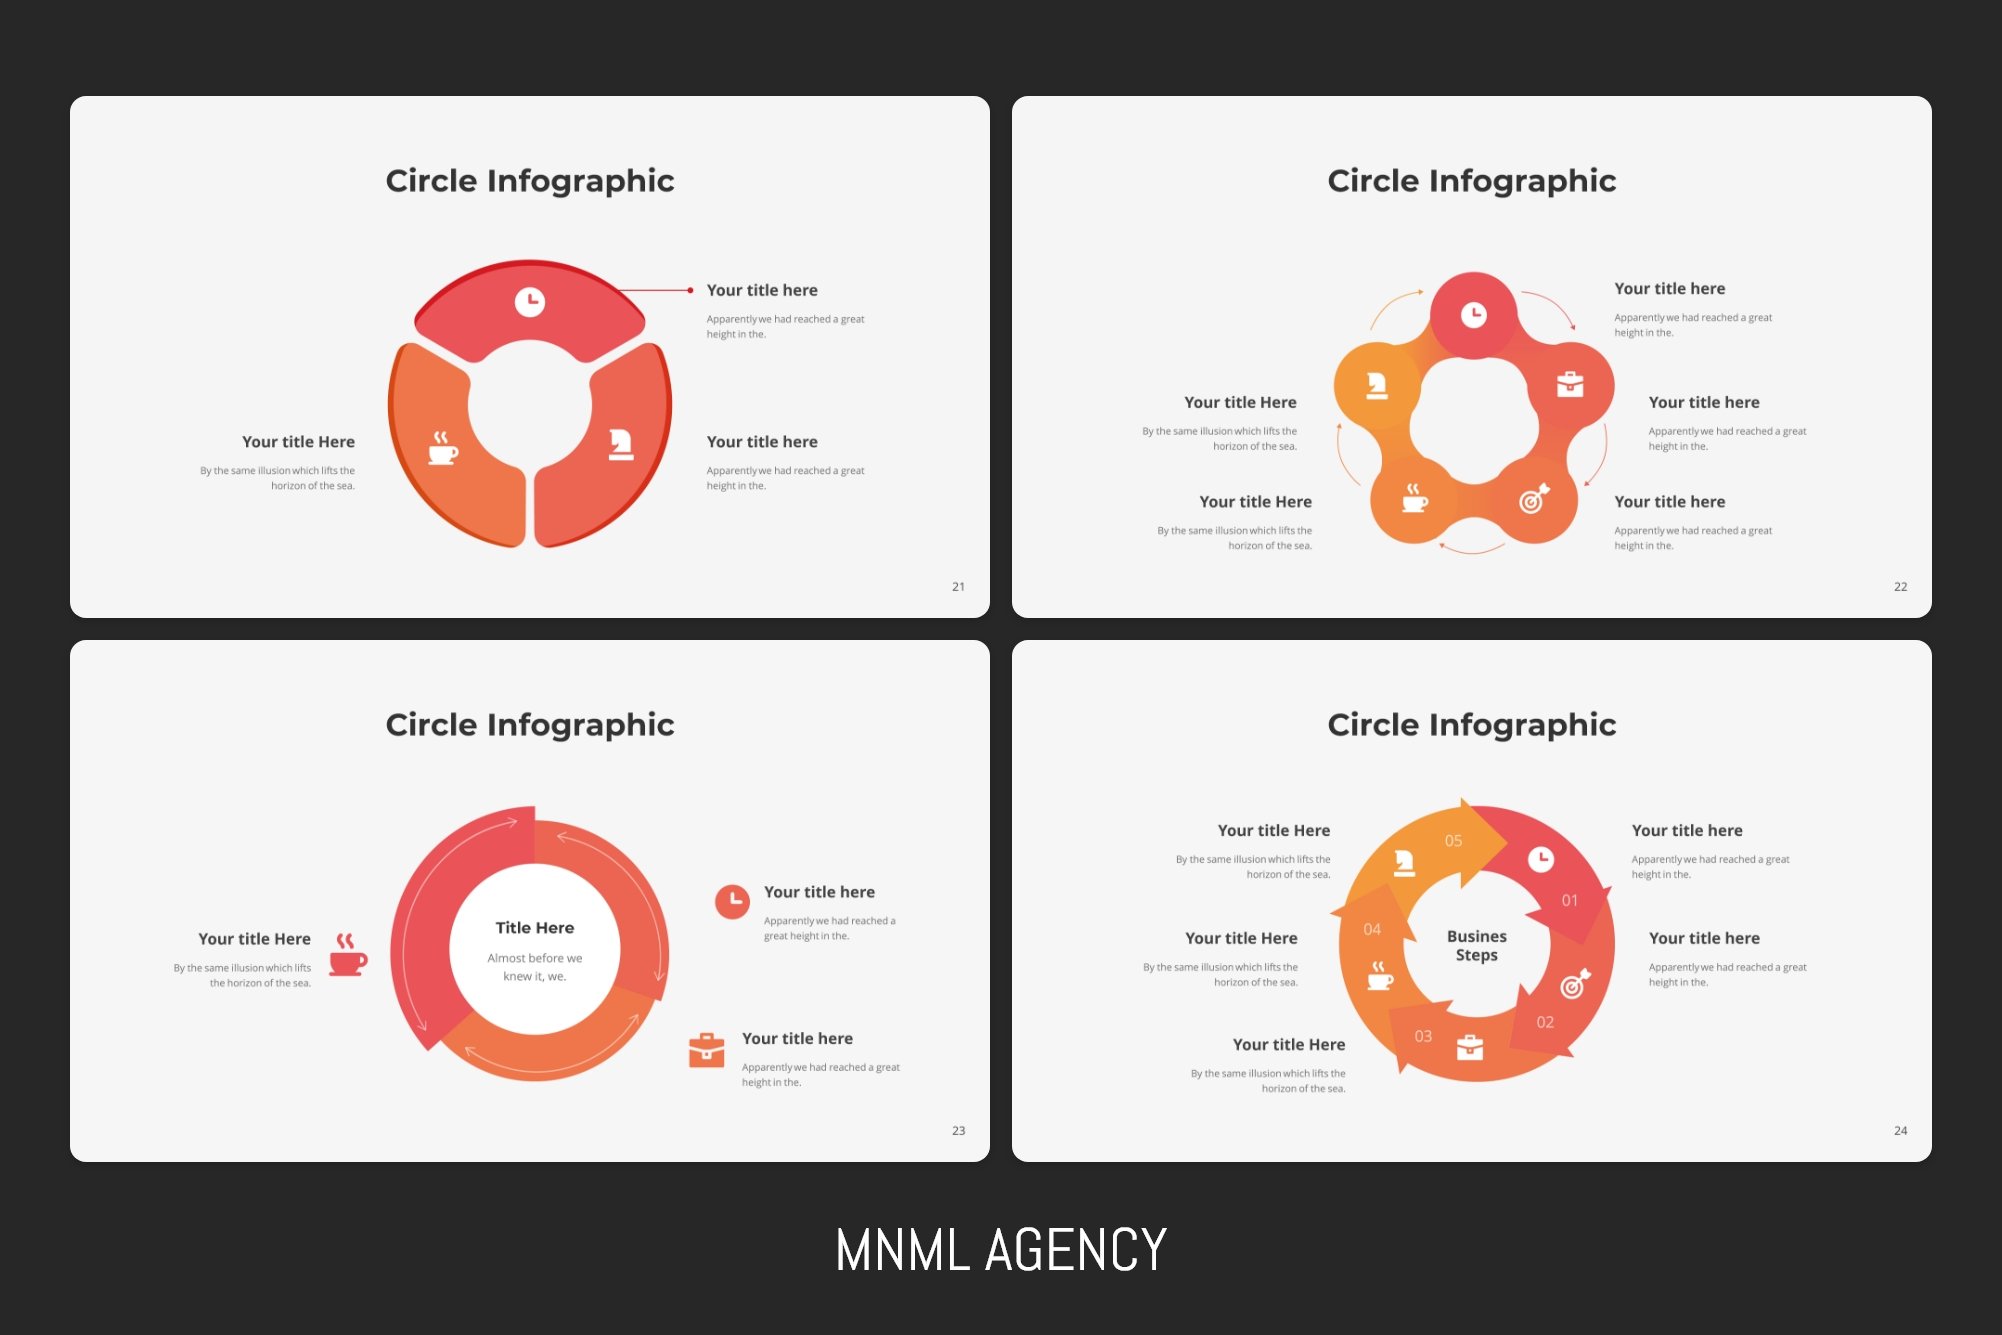 Very different variations of circular infographics.